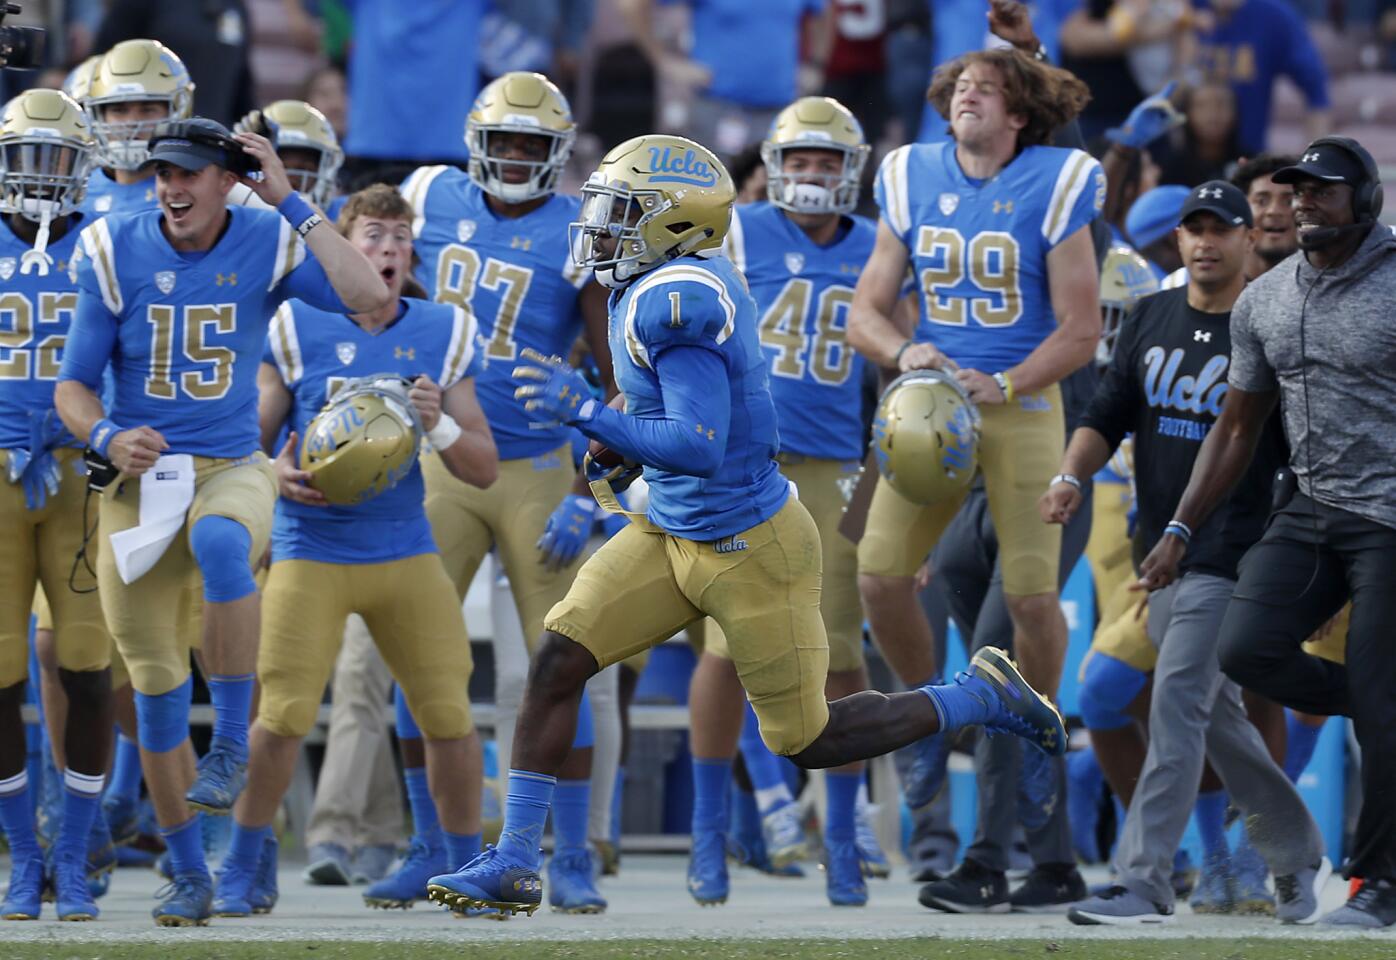 UCLA's Darnay Holmes returns a Stanford kickoff for a touchdown during the third.